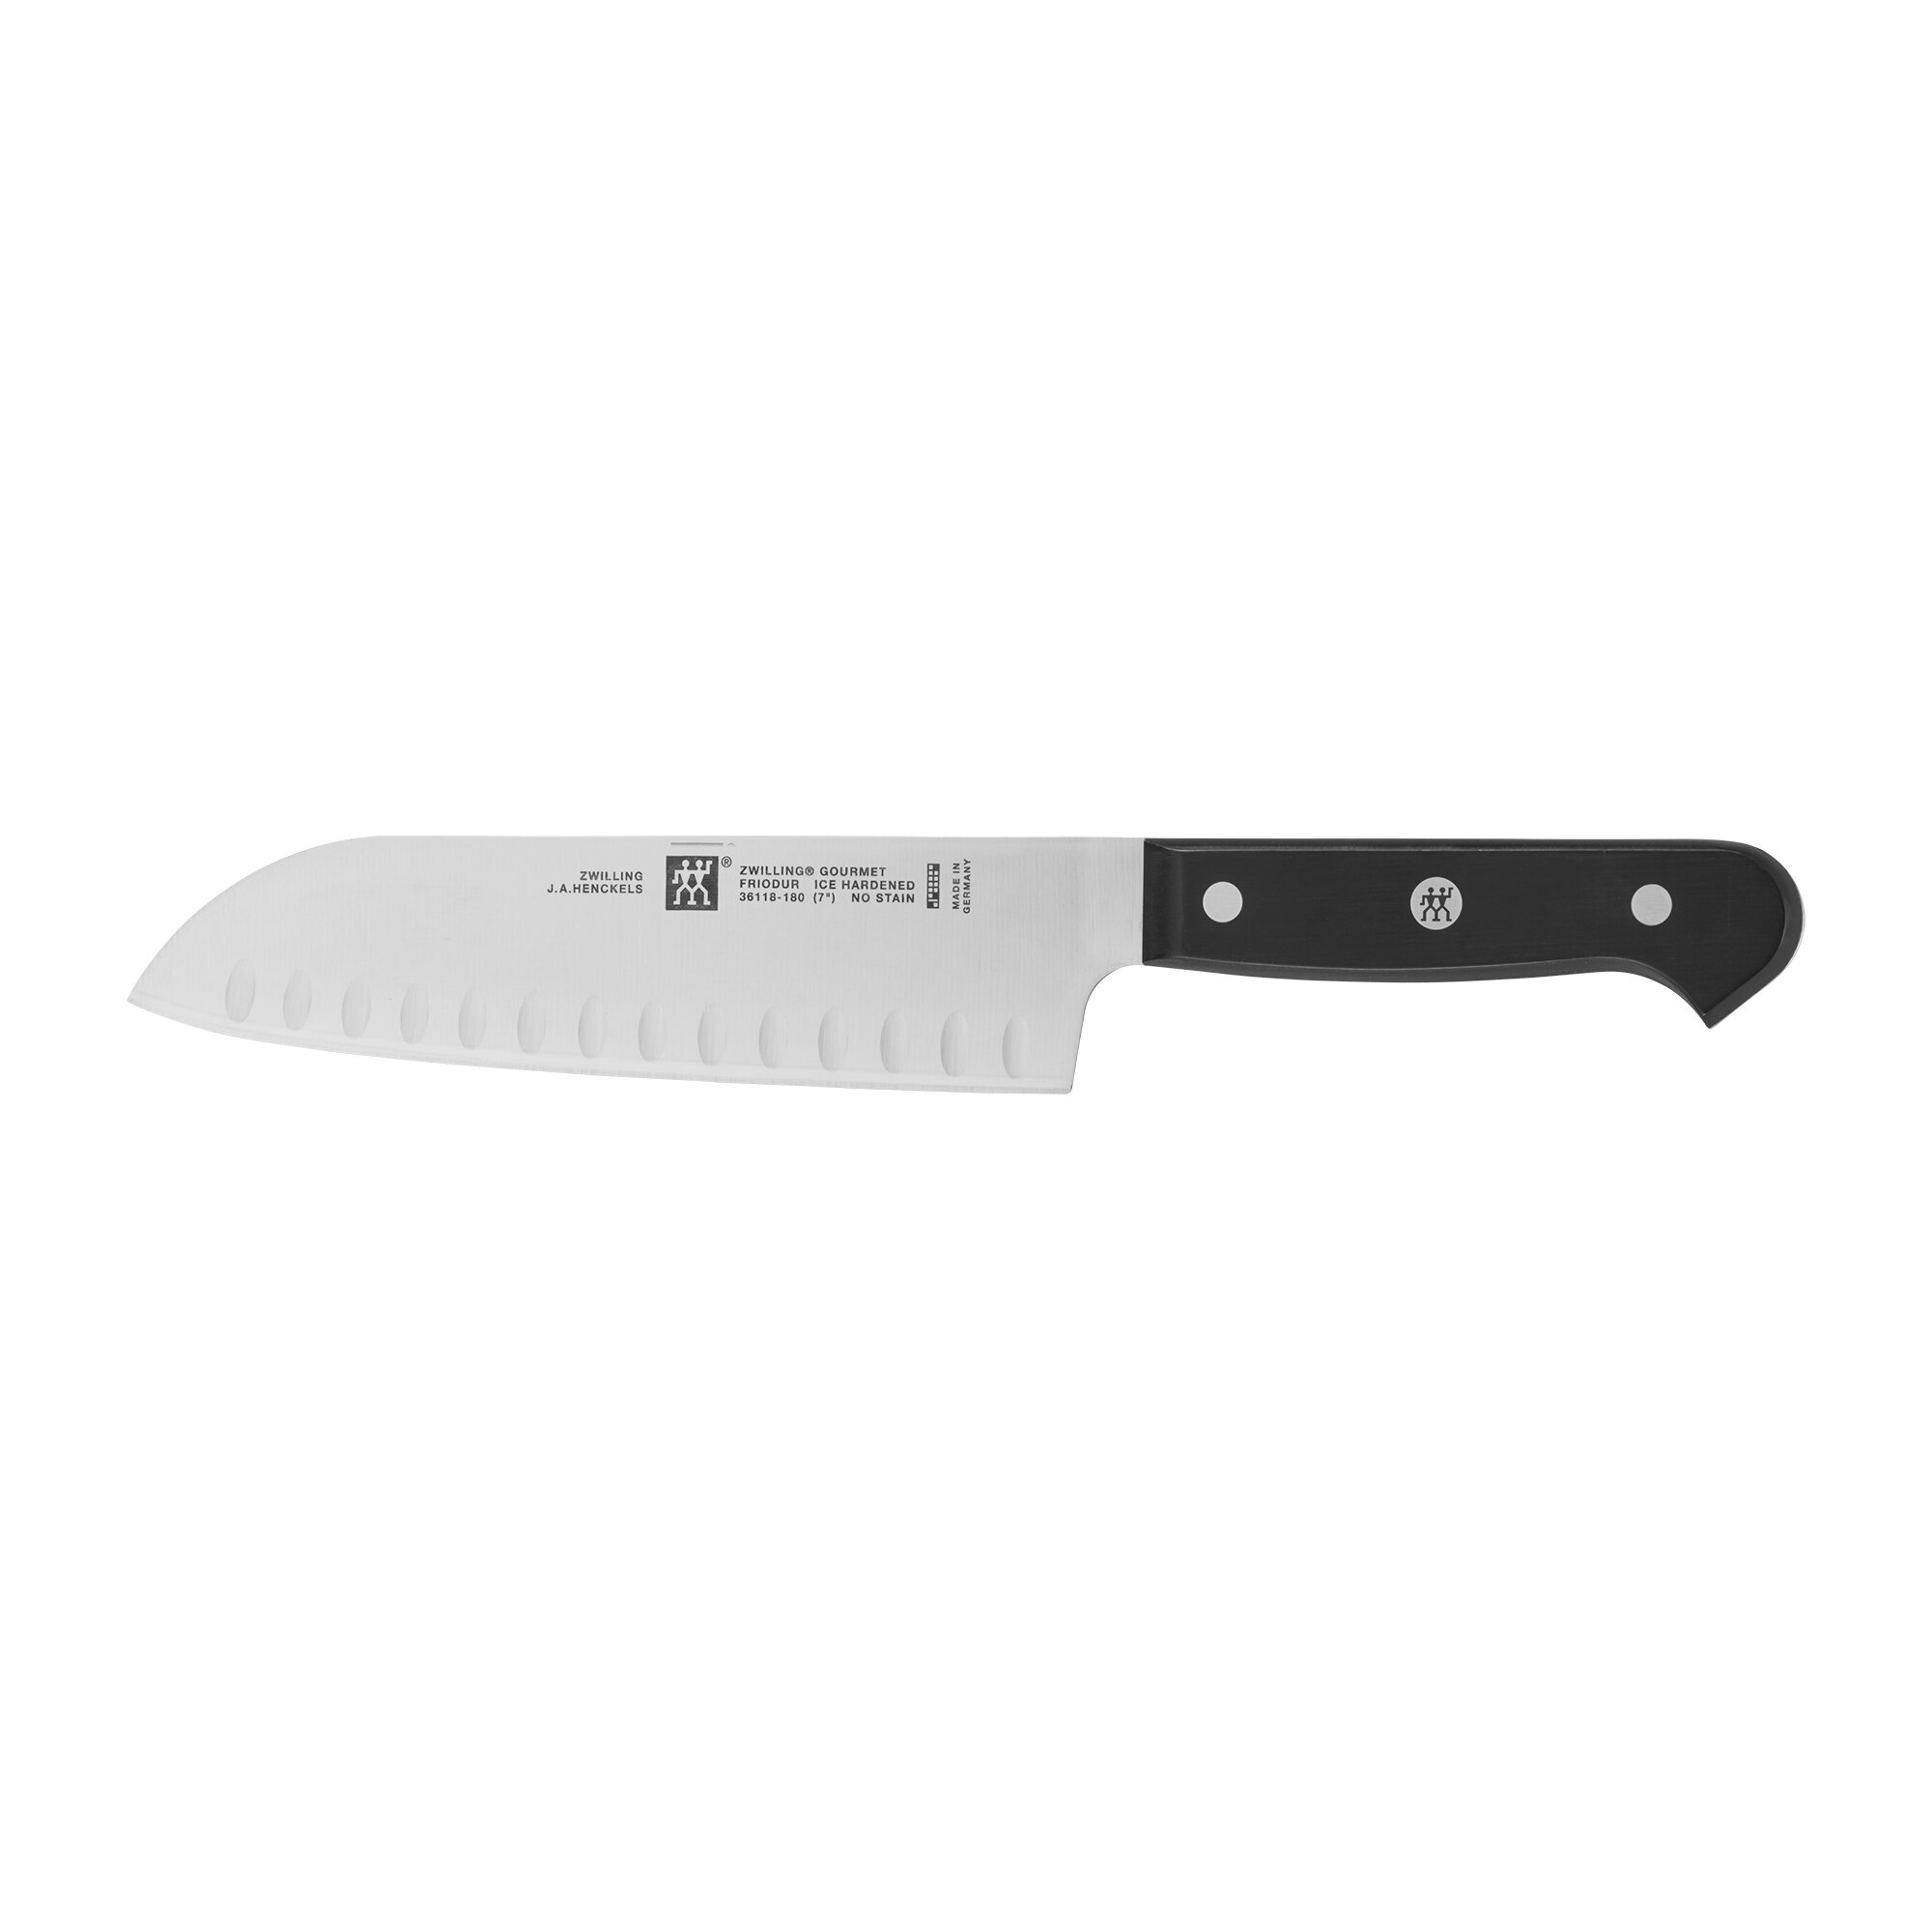 ZWILLING J.A. Henckels Zwilling Gourmet 8-inch Chef's Knife & Reviews